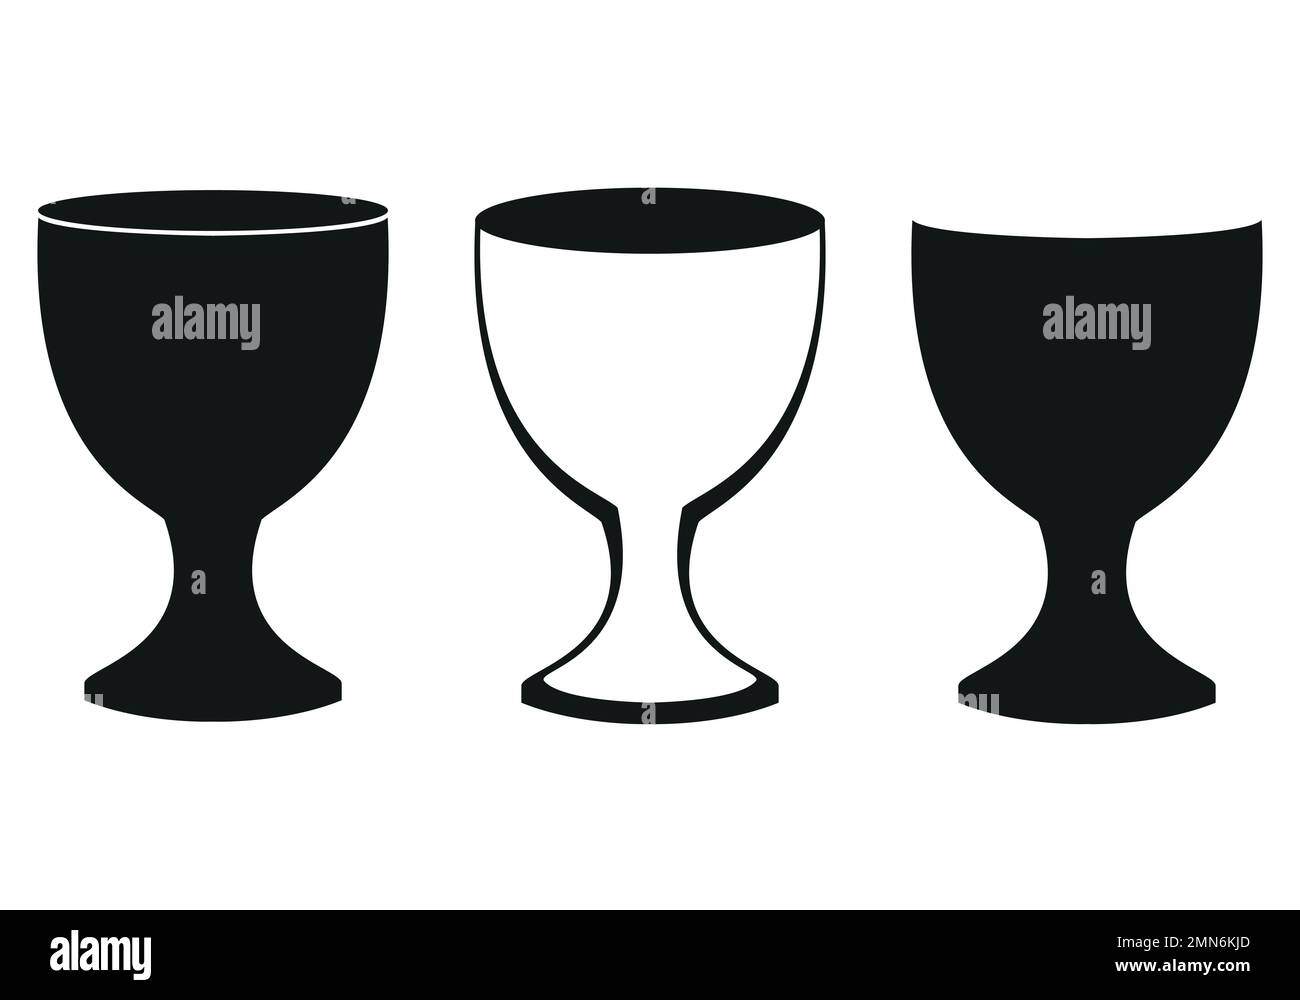 chalice, set of black and white vector illustrations of a cup, white background Stock Vector